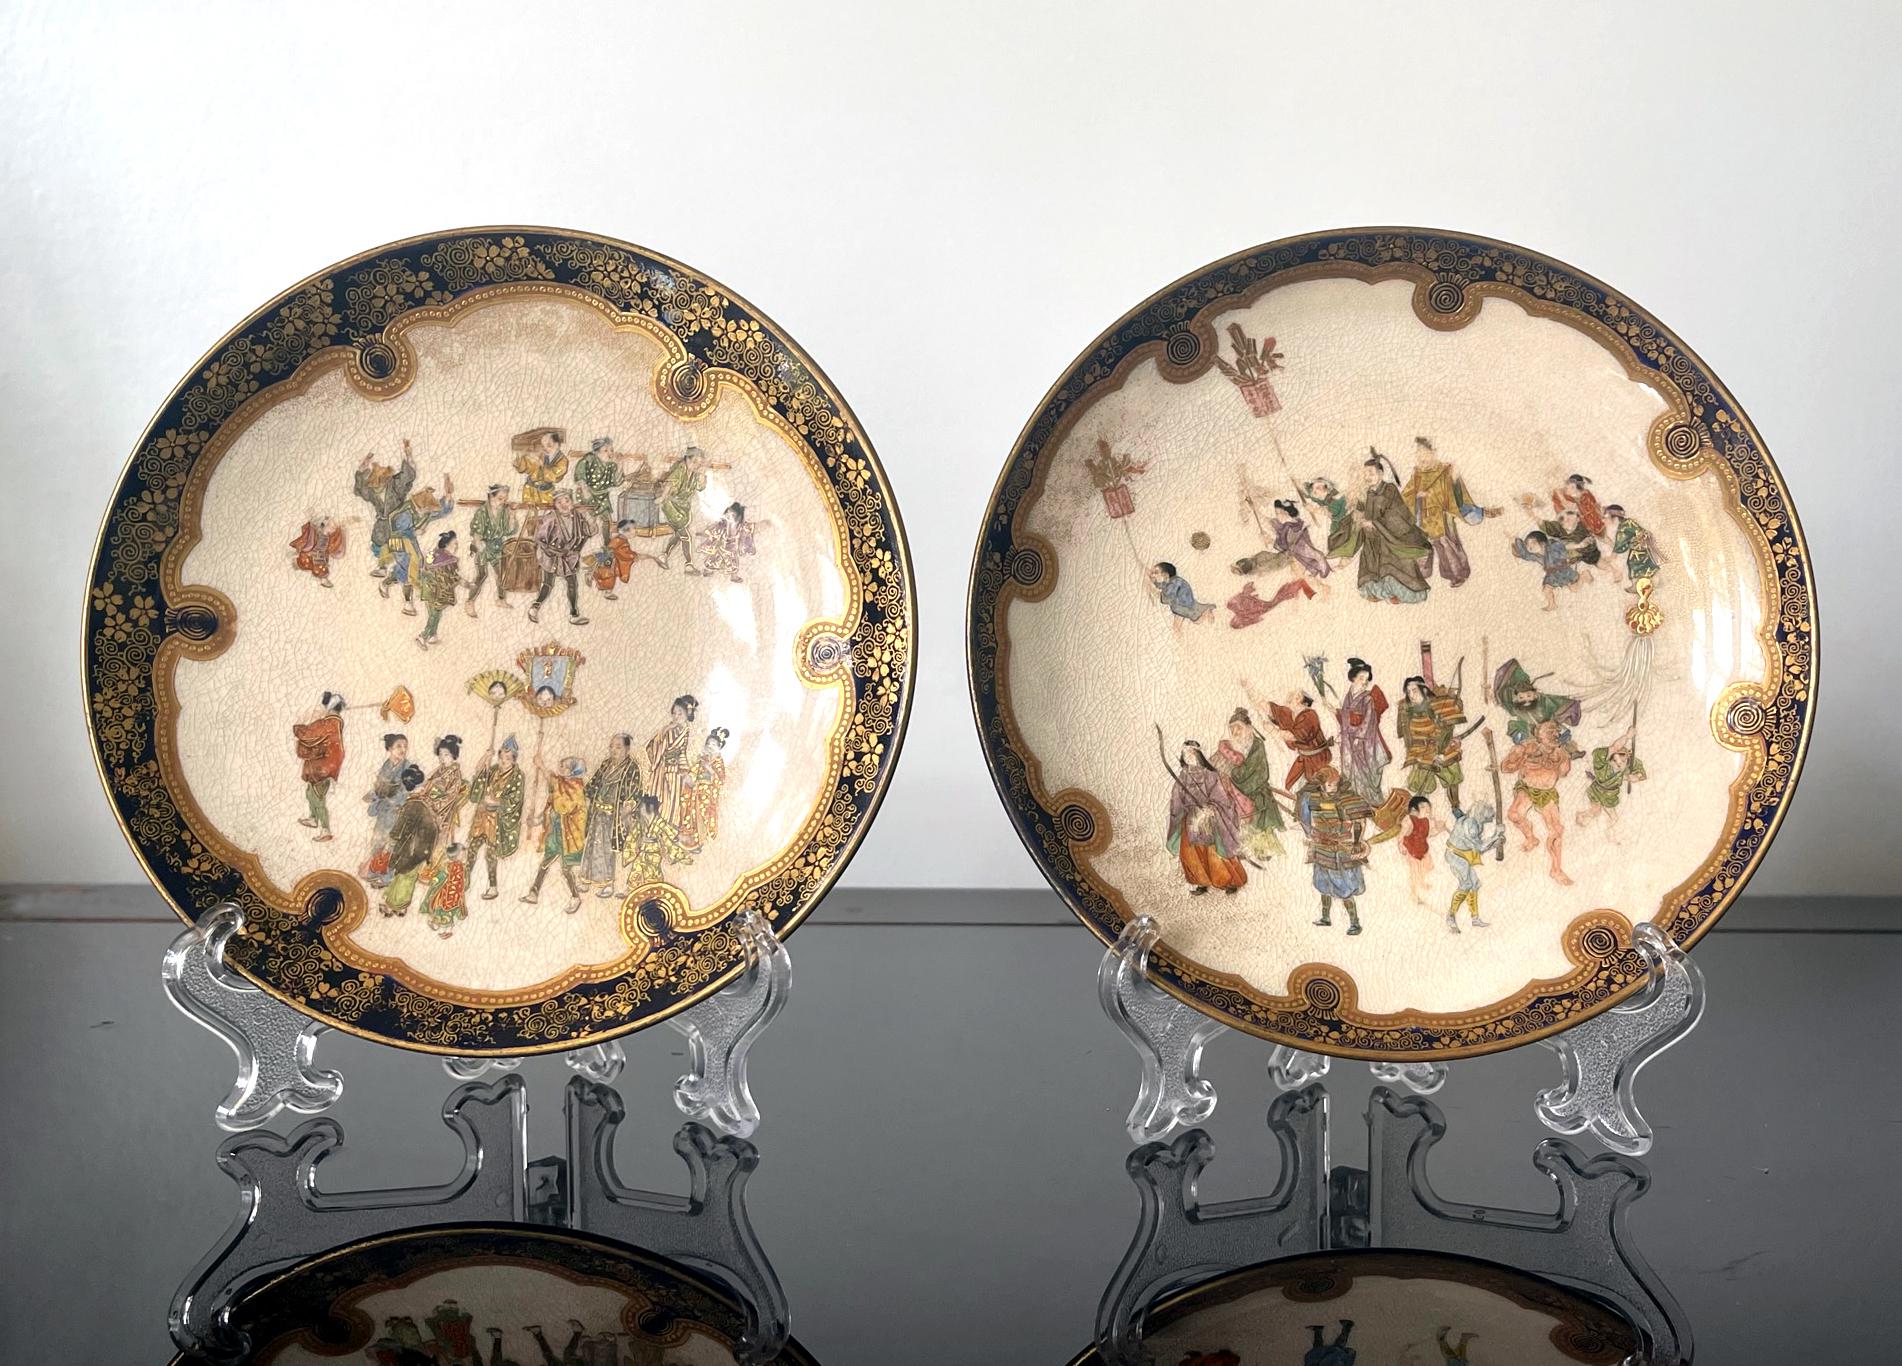 A pair of Satsuma ceramic plates made by Kinkozan studio circa 1880-1900s during the late Meiji Period. Each dish features miniature enamel decoration of two lively festival scenes within a cobalt blue border laced with gold scrolls ornamentation.